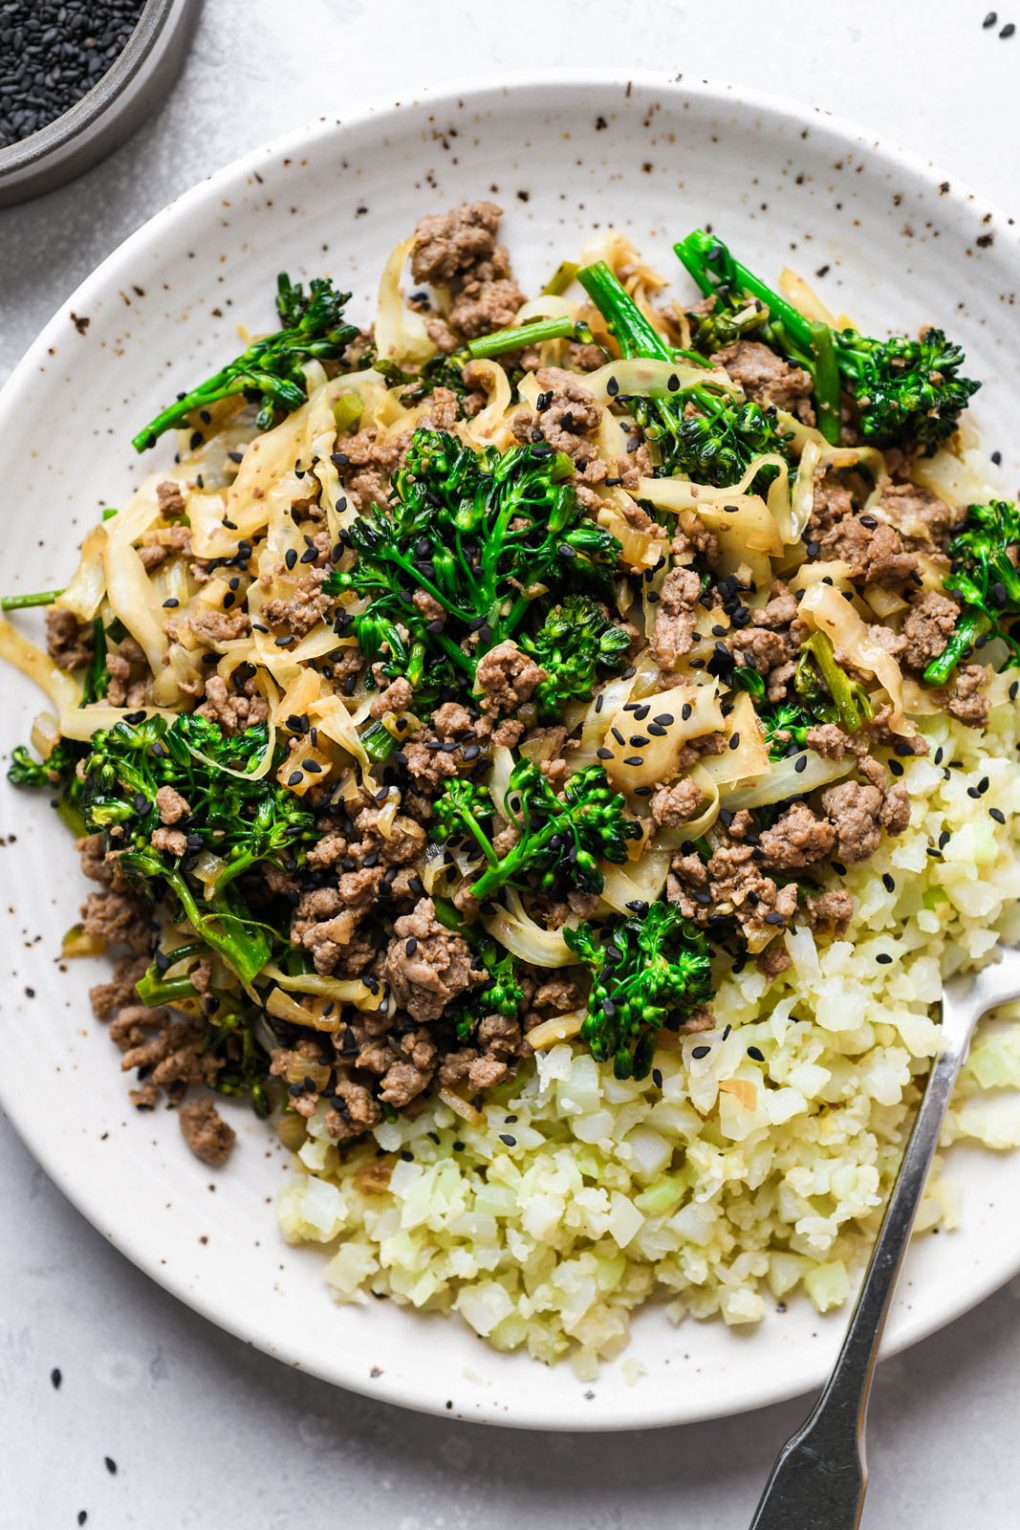 Overhead shot of a white speckled plate with ground beef and cabbage whole30 stir fry with cut up broccolini, served next to some cauliflower rice and topped with black sesame seeds. 